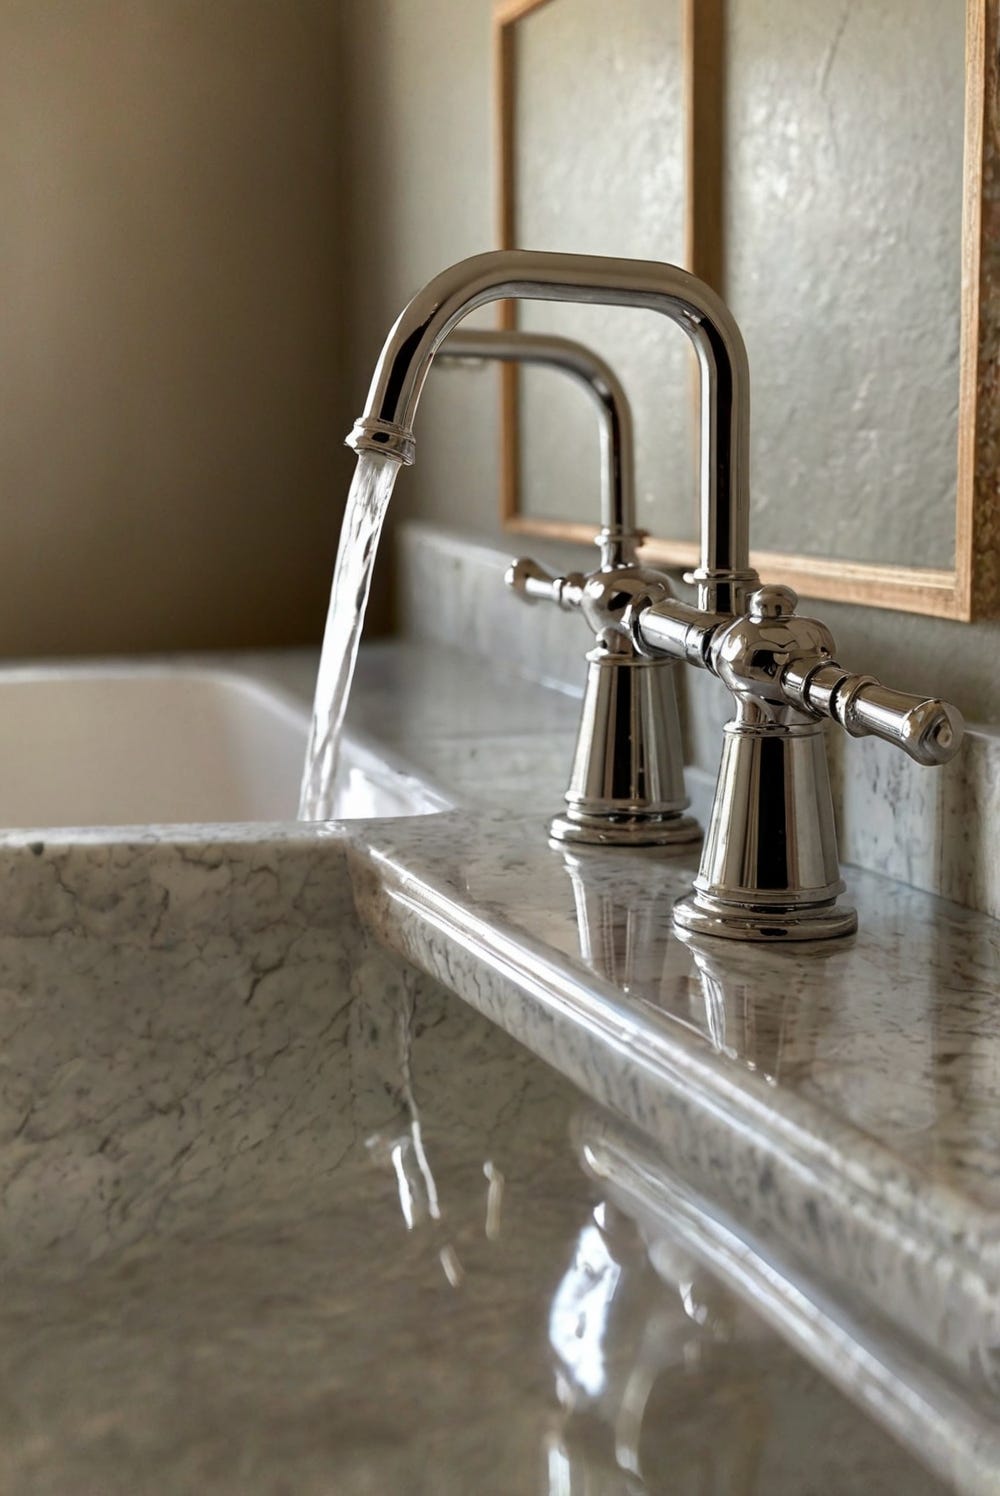 bathroom faucet styles, best bathroom sink faucets, choose the perfect faucet, faucet size guide, sink faucet selection, bathroom fixtures selection, selecting the ideal faucet